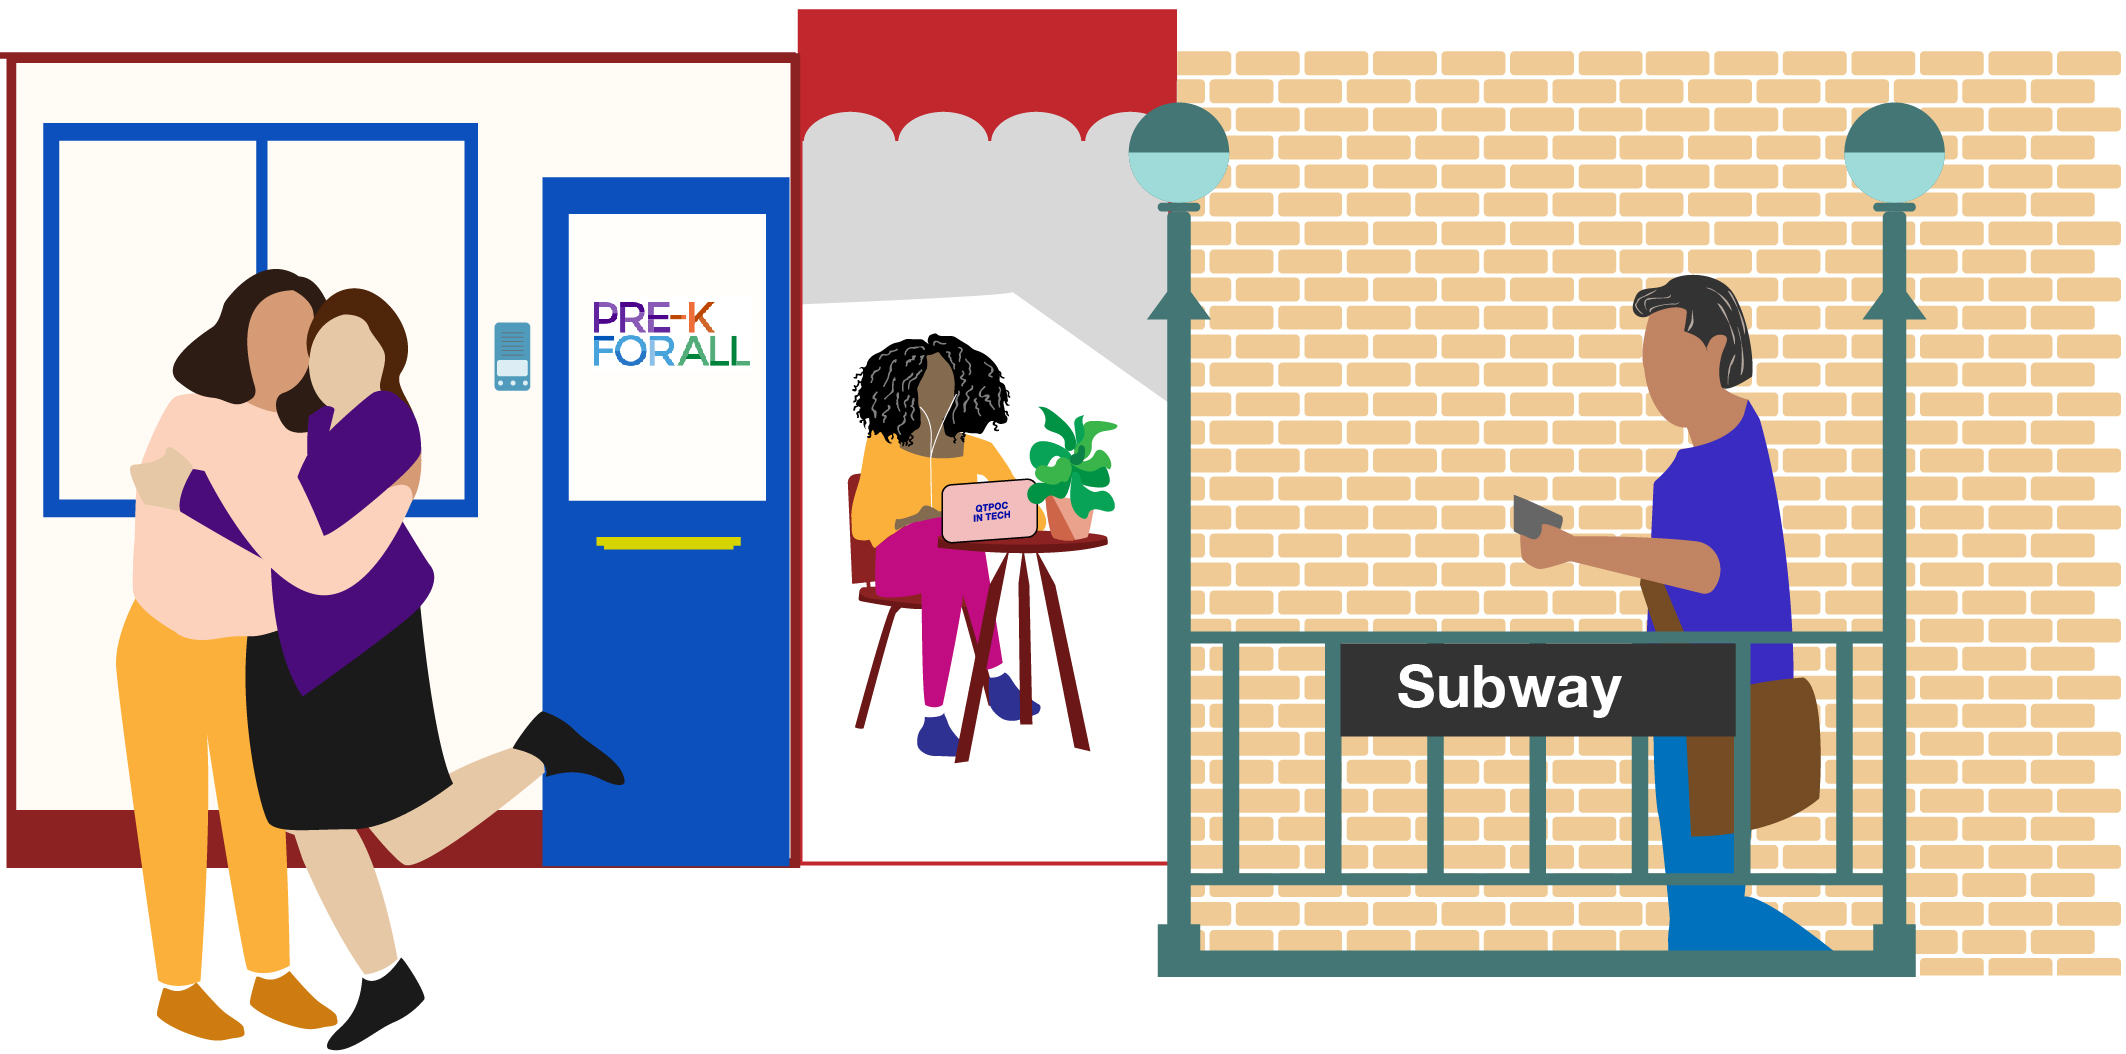 Illustrated New Yorkers happily greeting each other, entering the subway, and working at a laptop.